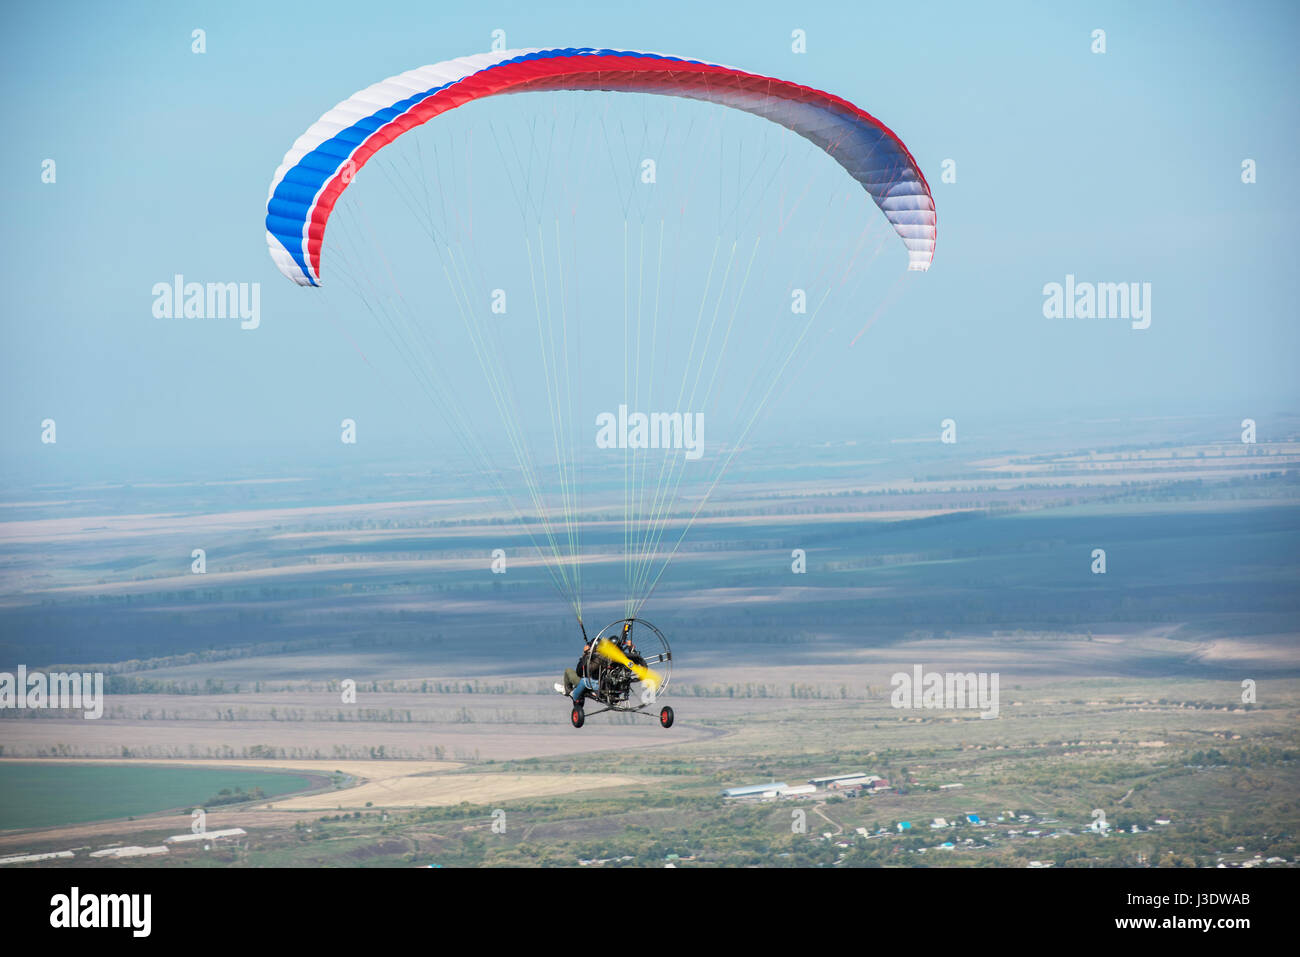 Paragliding in mountains. Para gliders in fight in the mountains, extreme sport activity. Stock Photo